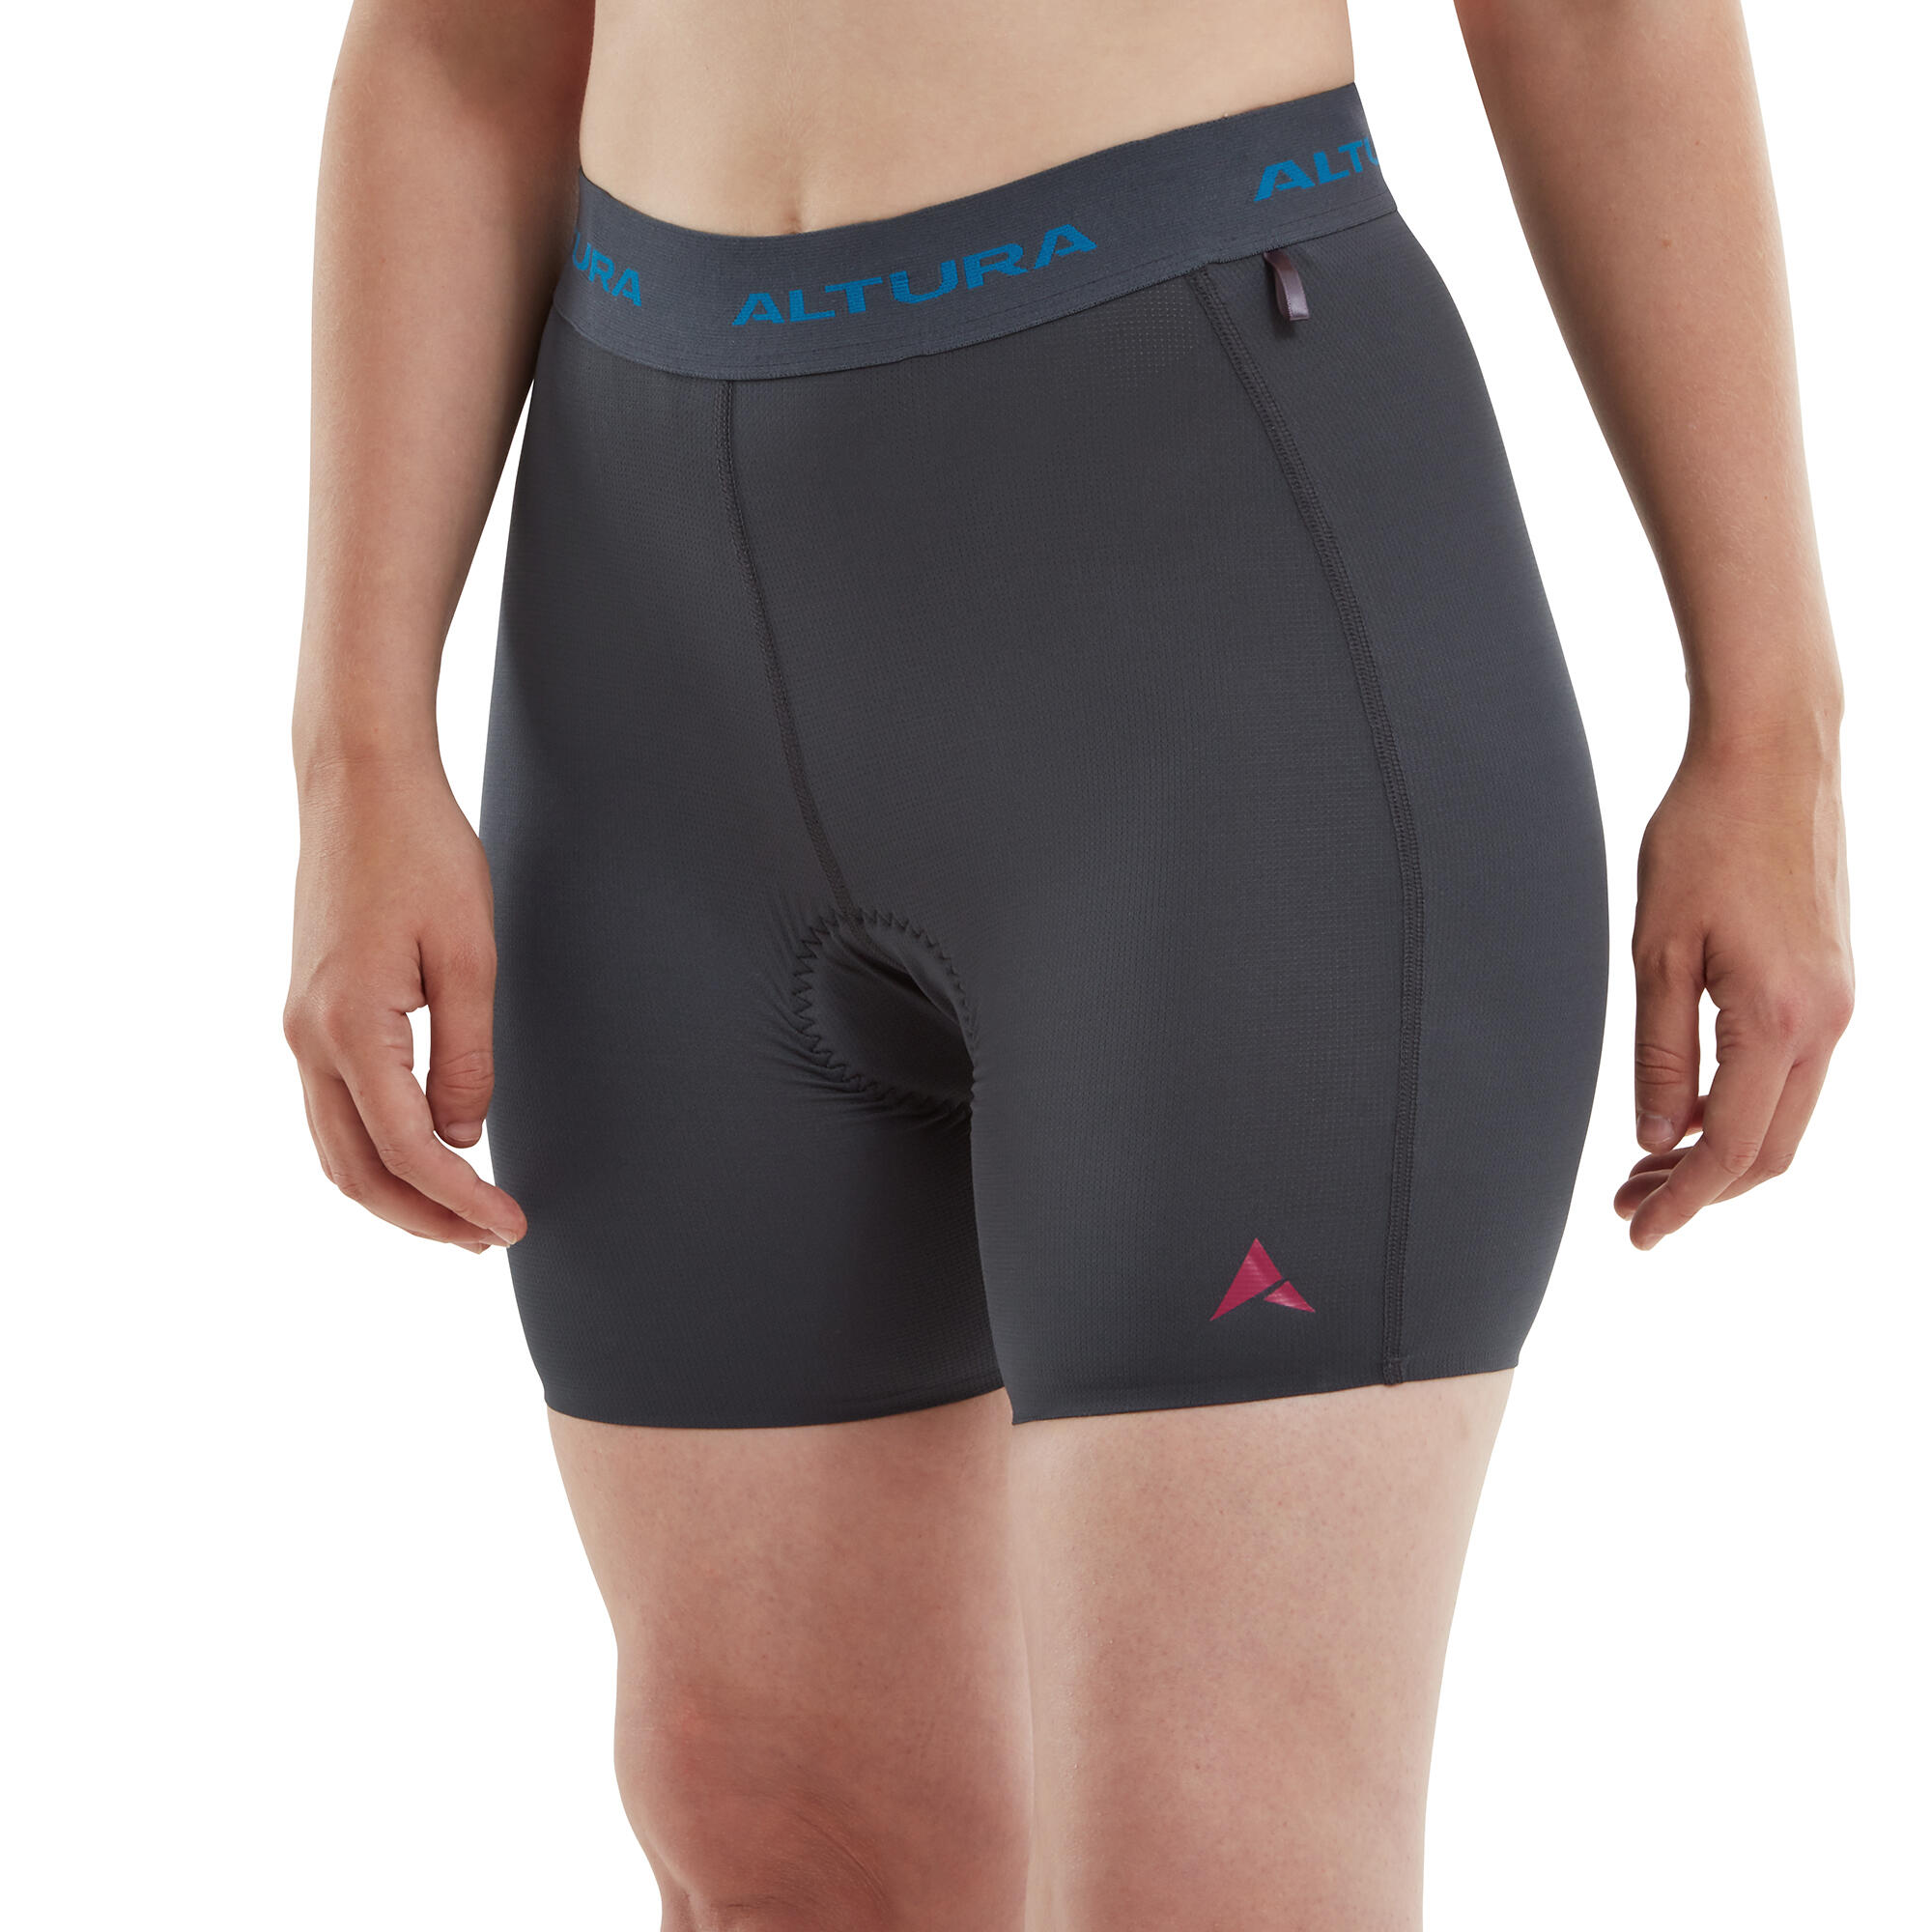 Tempo Women's Cycling Undershorts 1/4